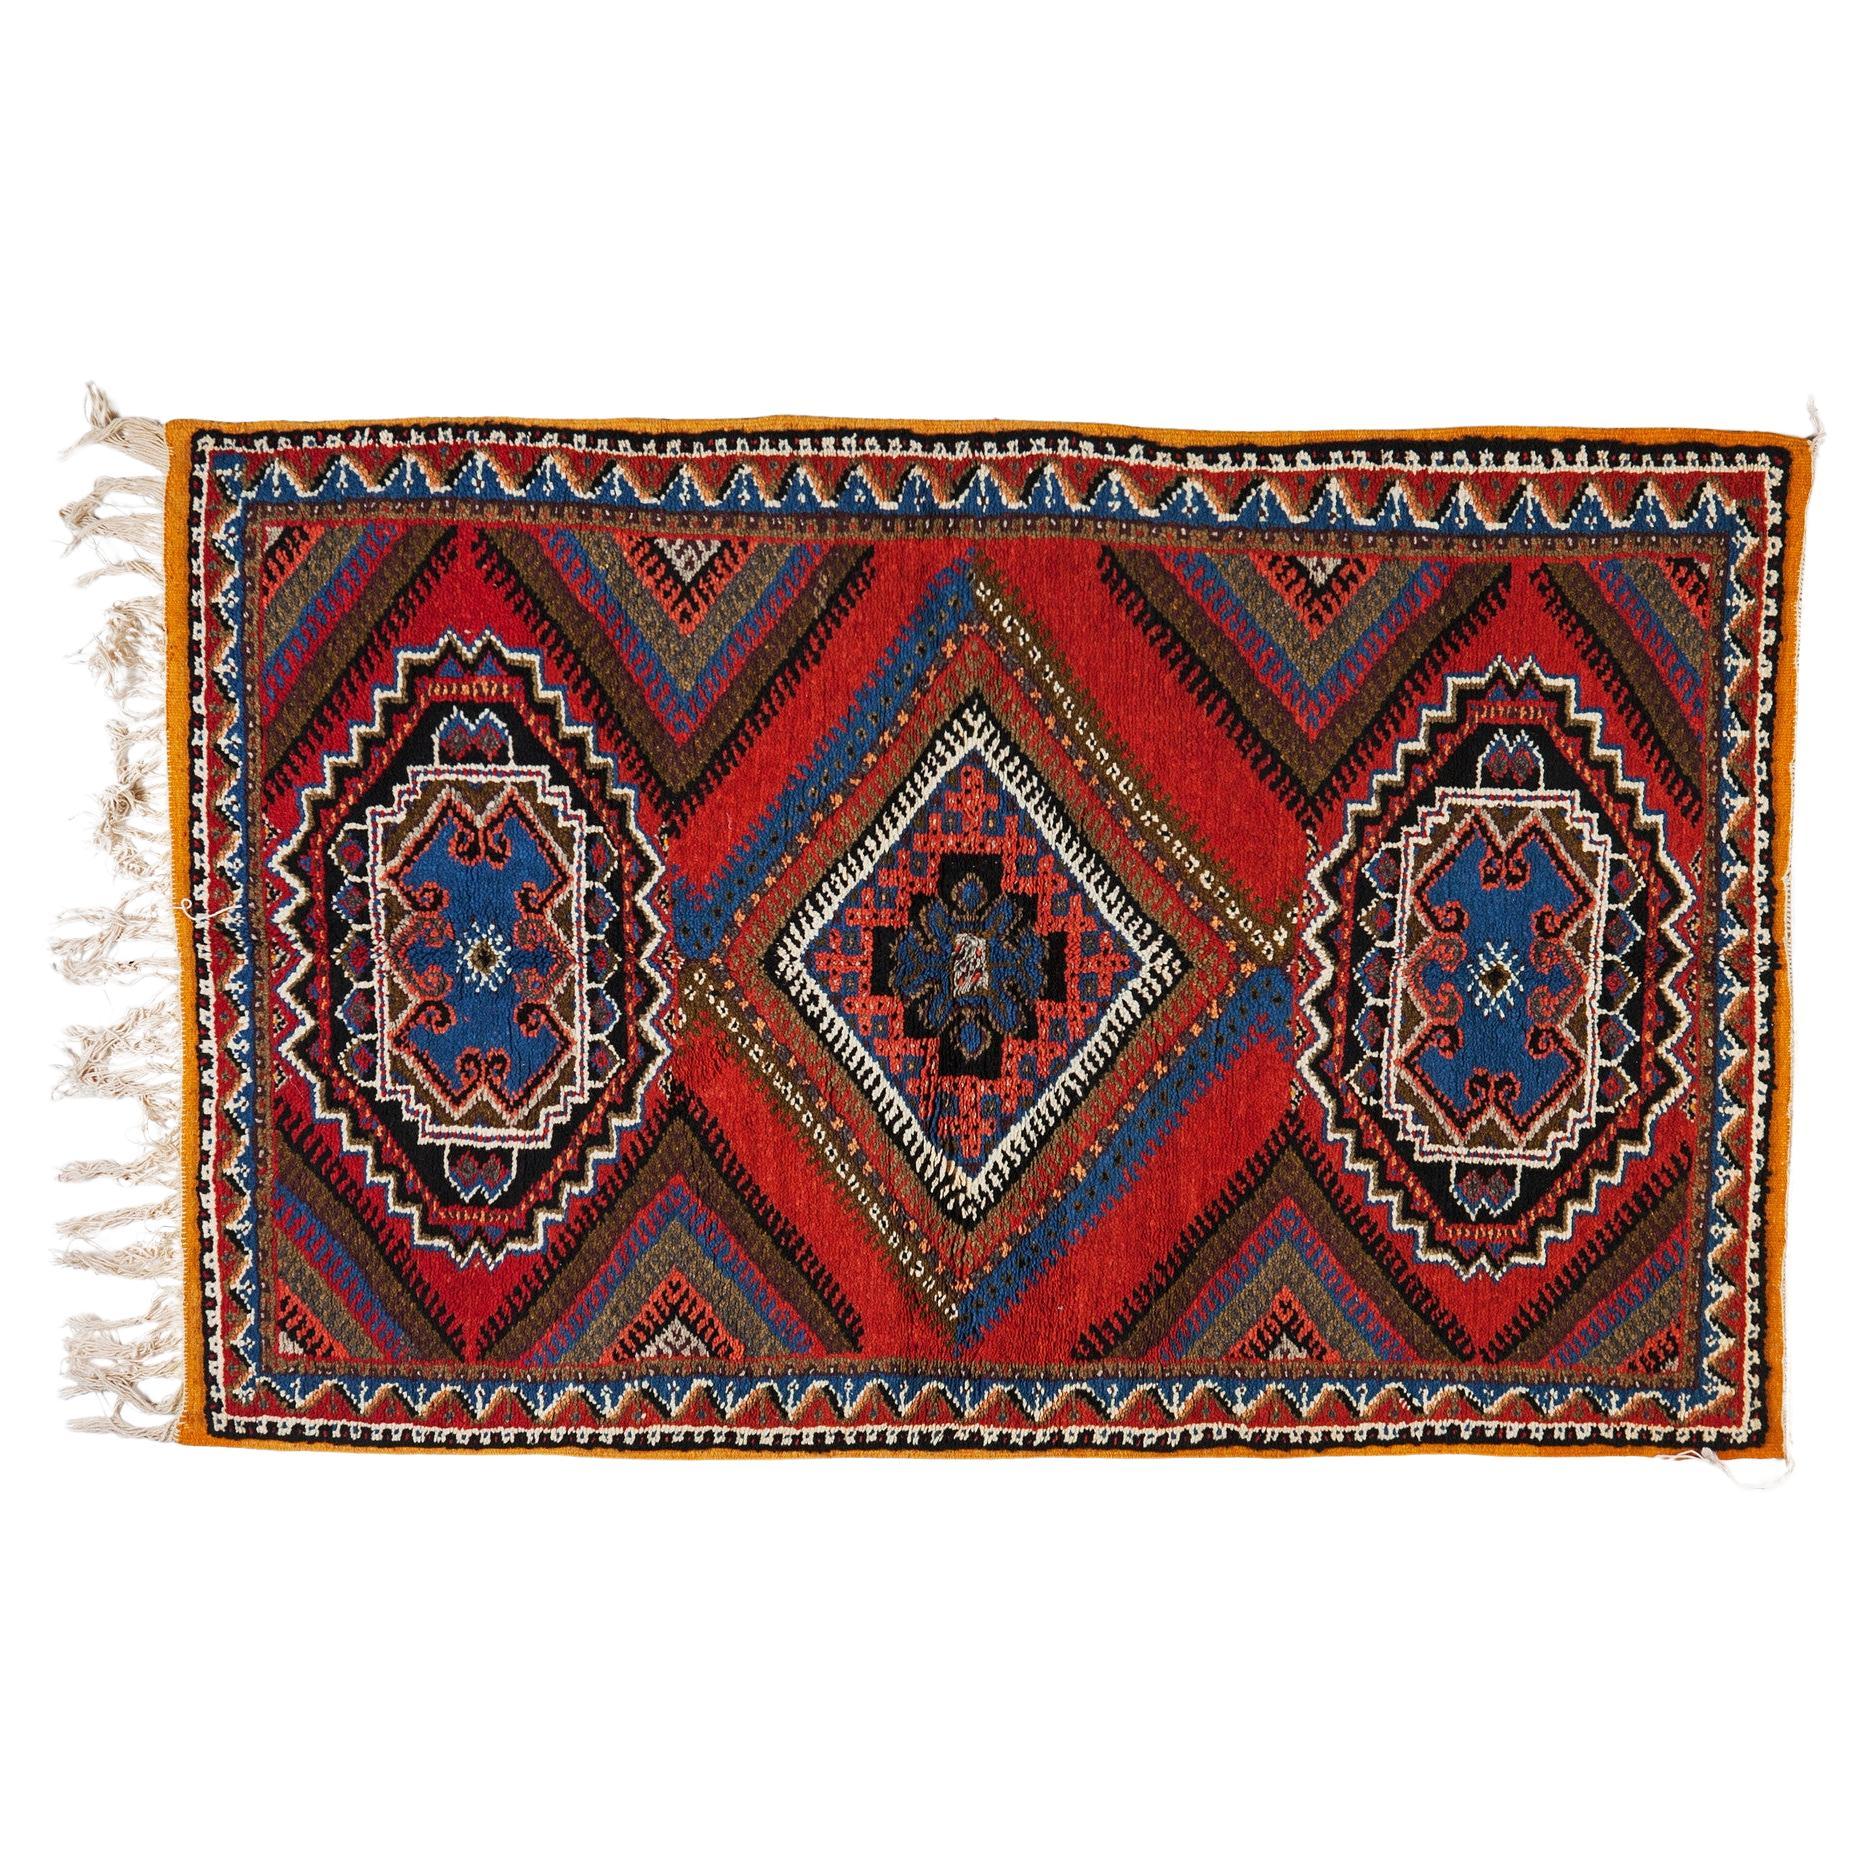 How do you clean Moroccan rugs?